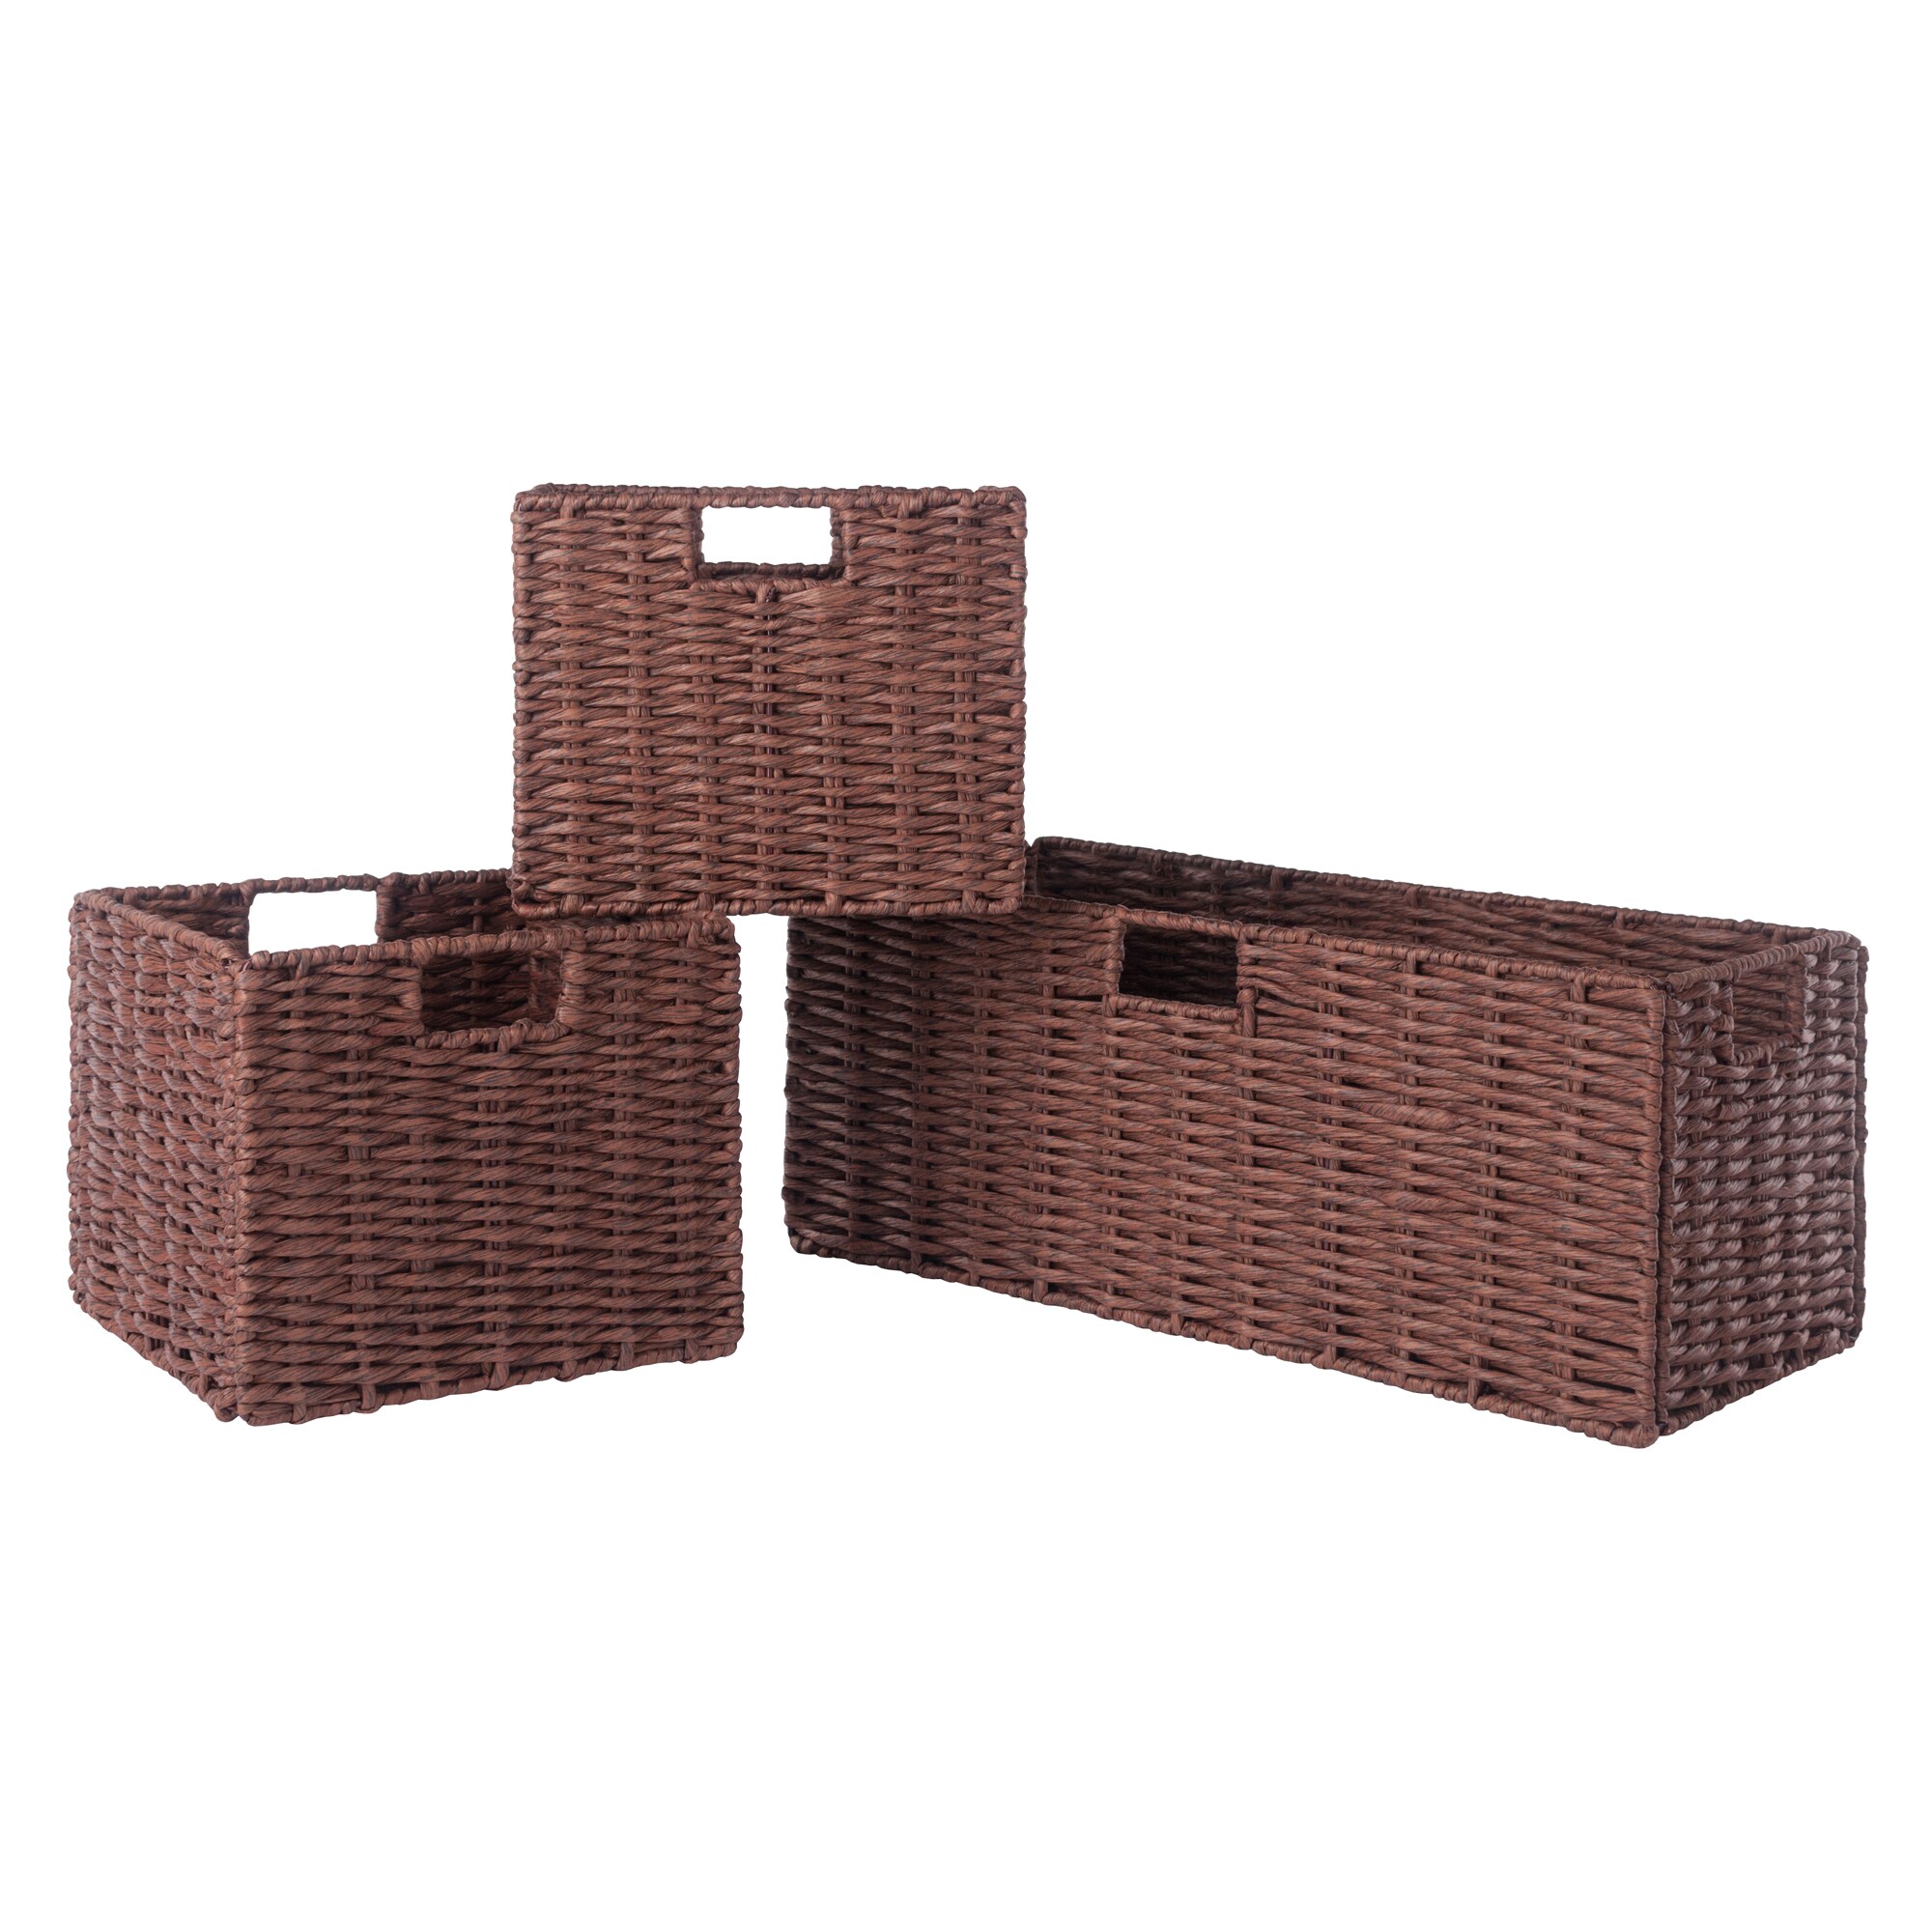 1 Large and 2 Small Leo Set of 3 Wired Baskets